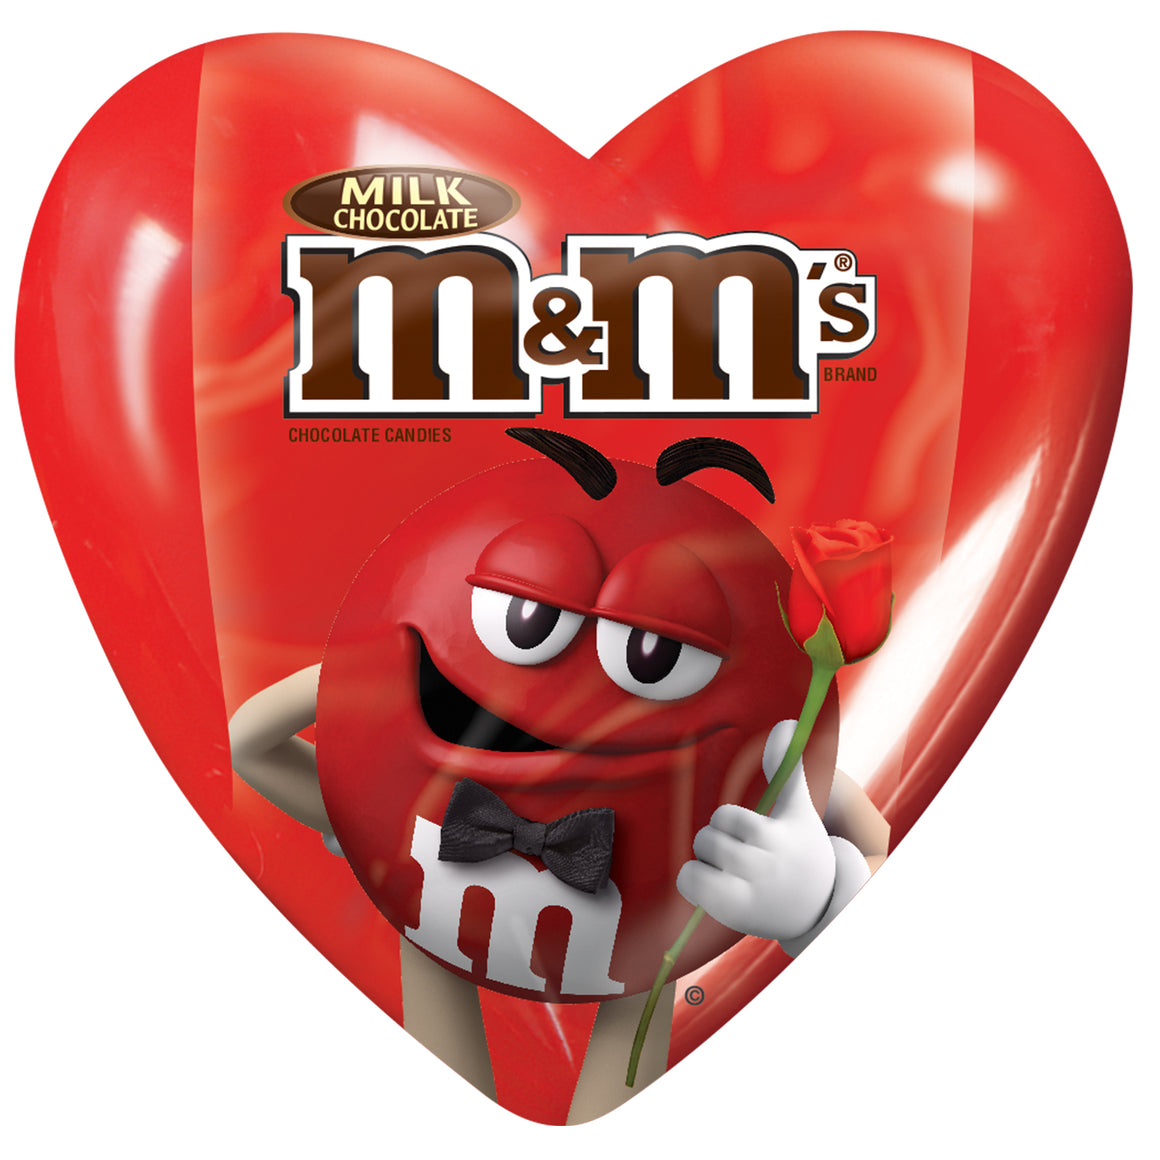 All City Candy M&M's Filled Hearts - .93 oz 1 Heart Mars Chocolate For fresh candy and great service, visit www.allcitycandy.com